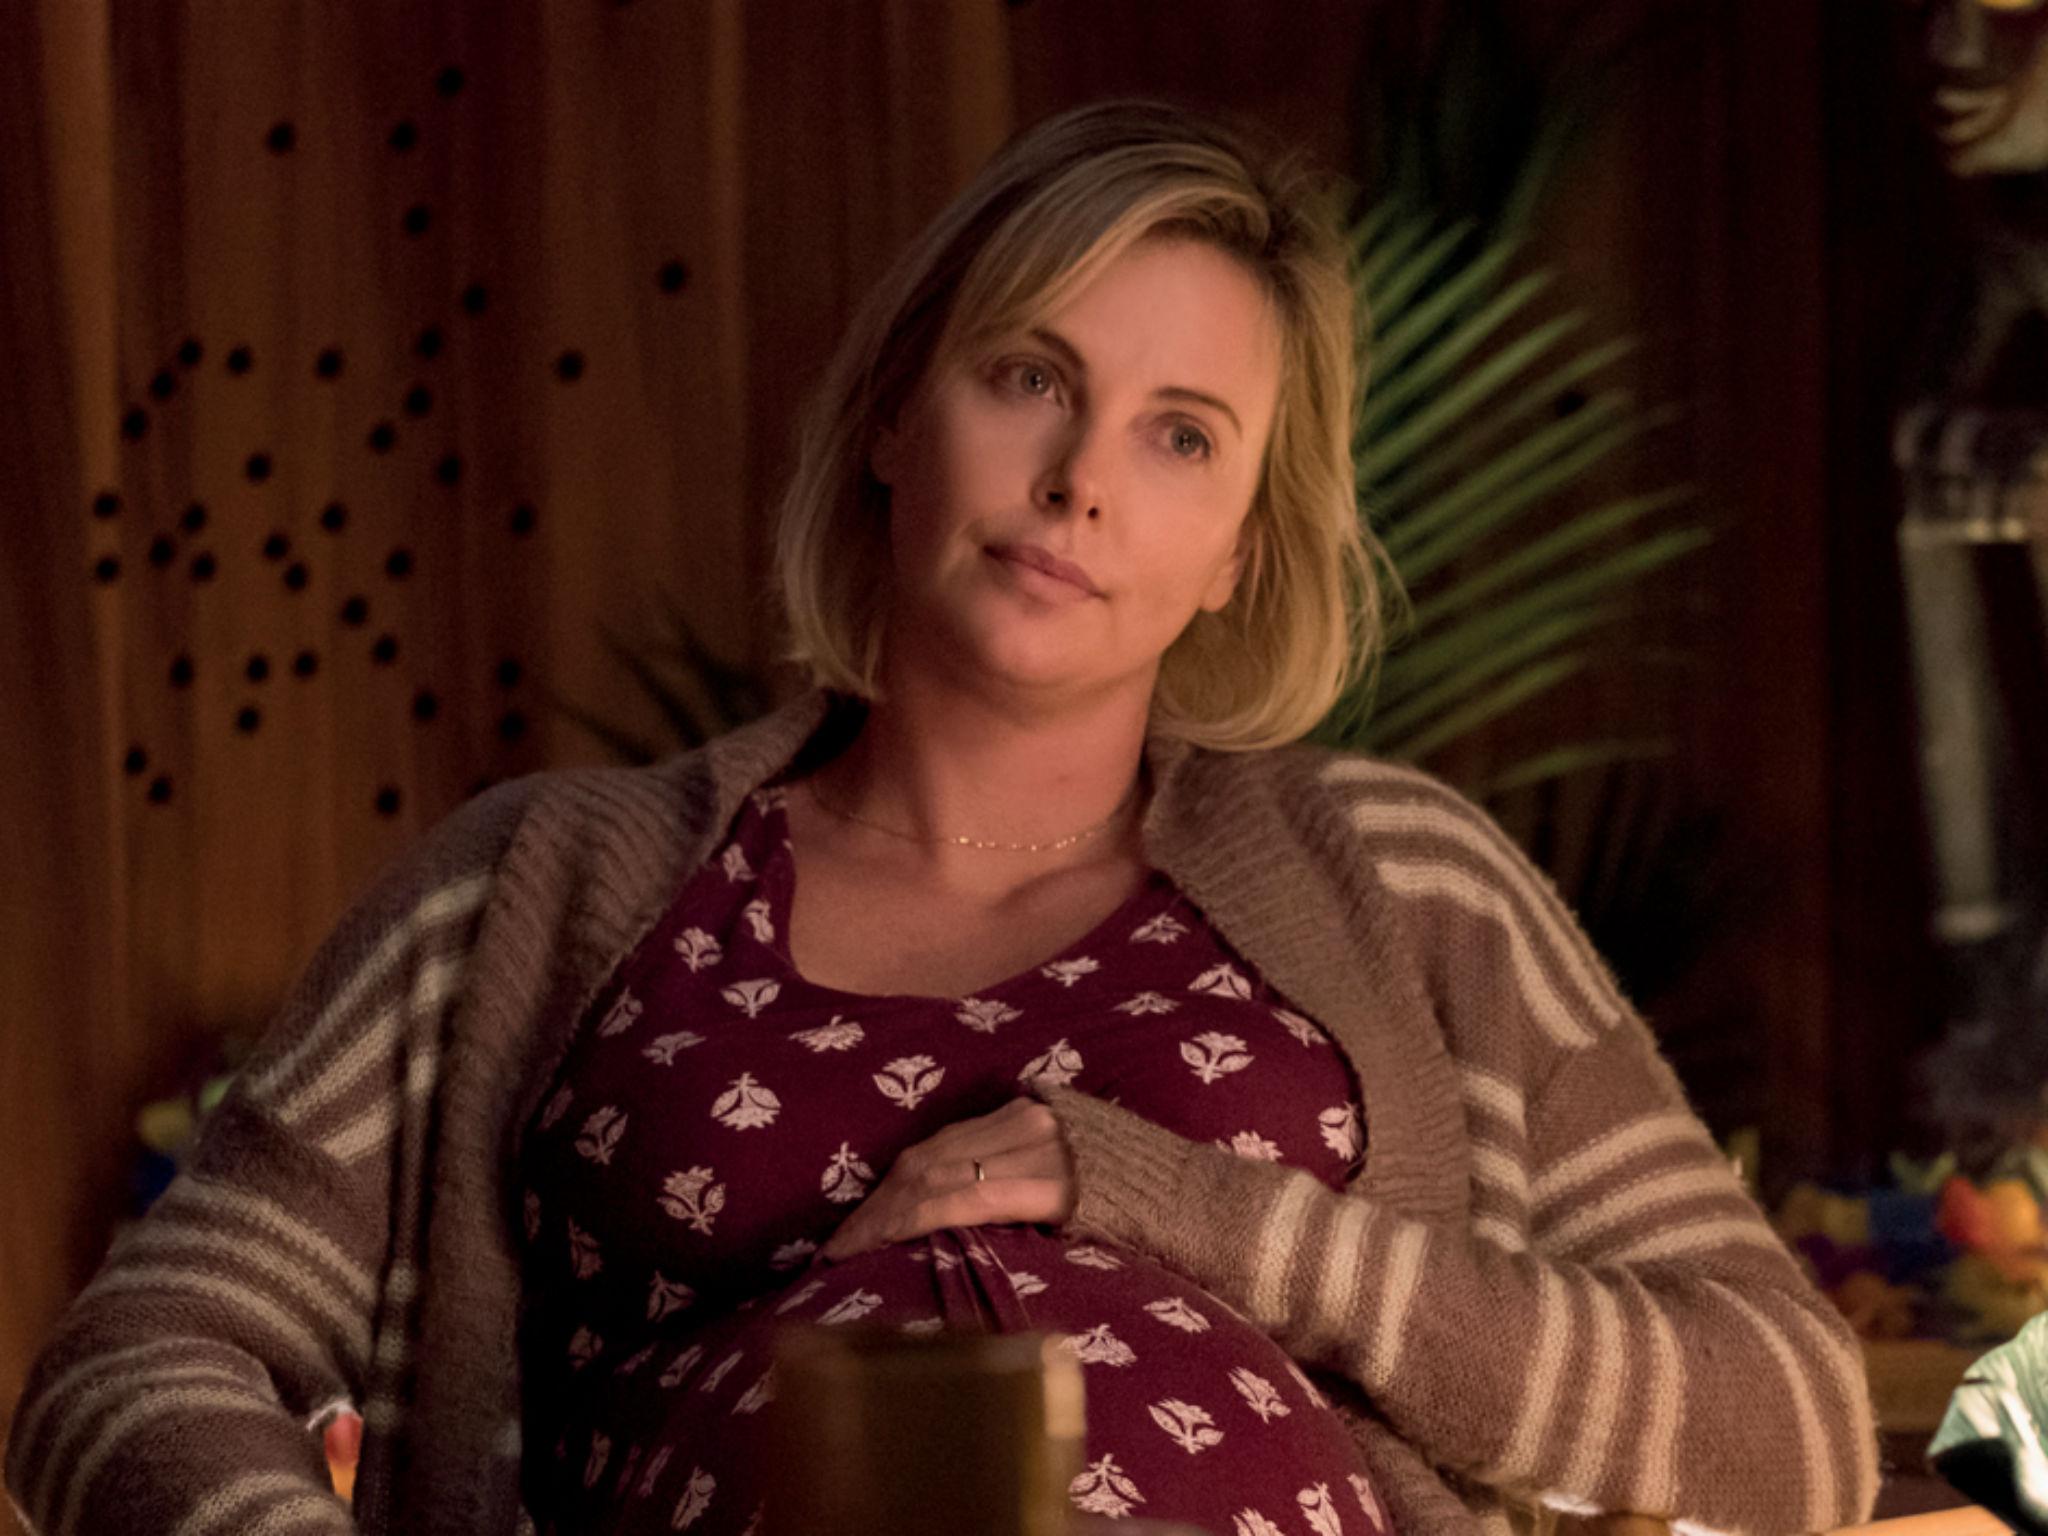 Method mam: Charlize Theron gained 50lbs to play a downtrodden mother in comedy-drama ‘Tully’